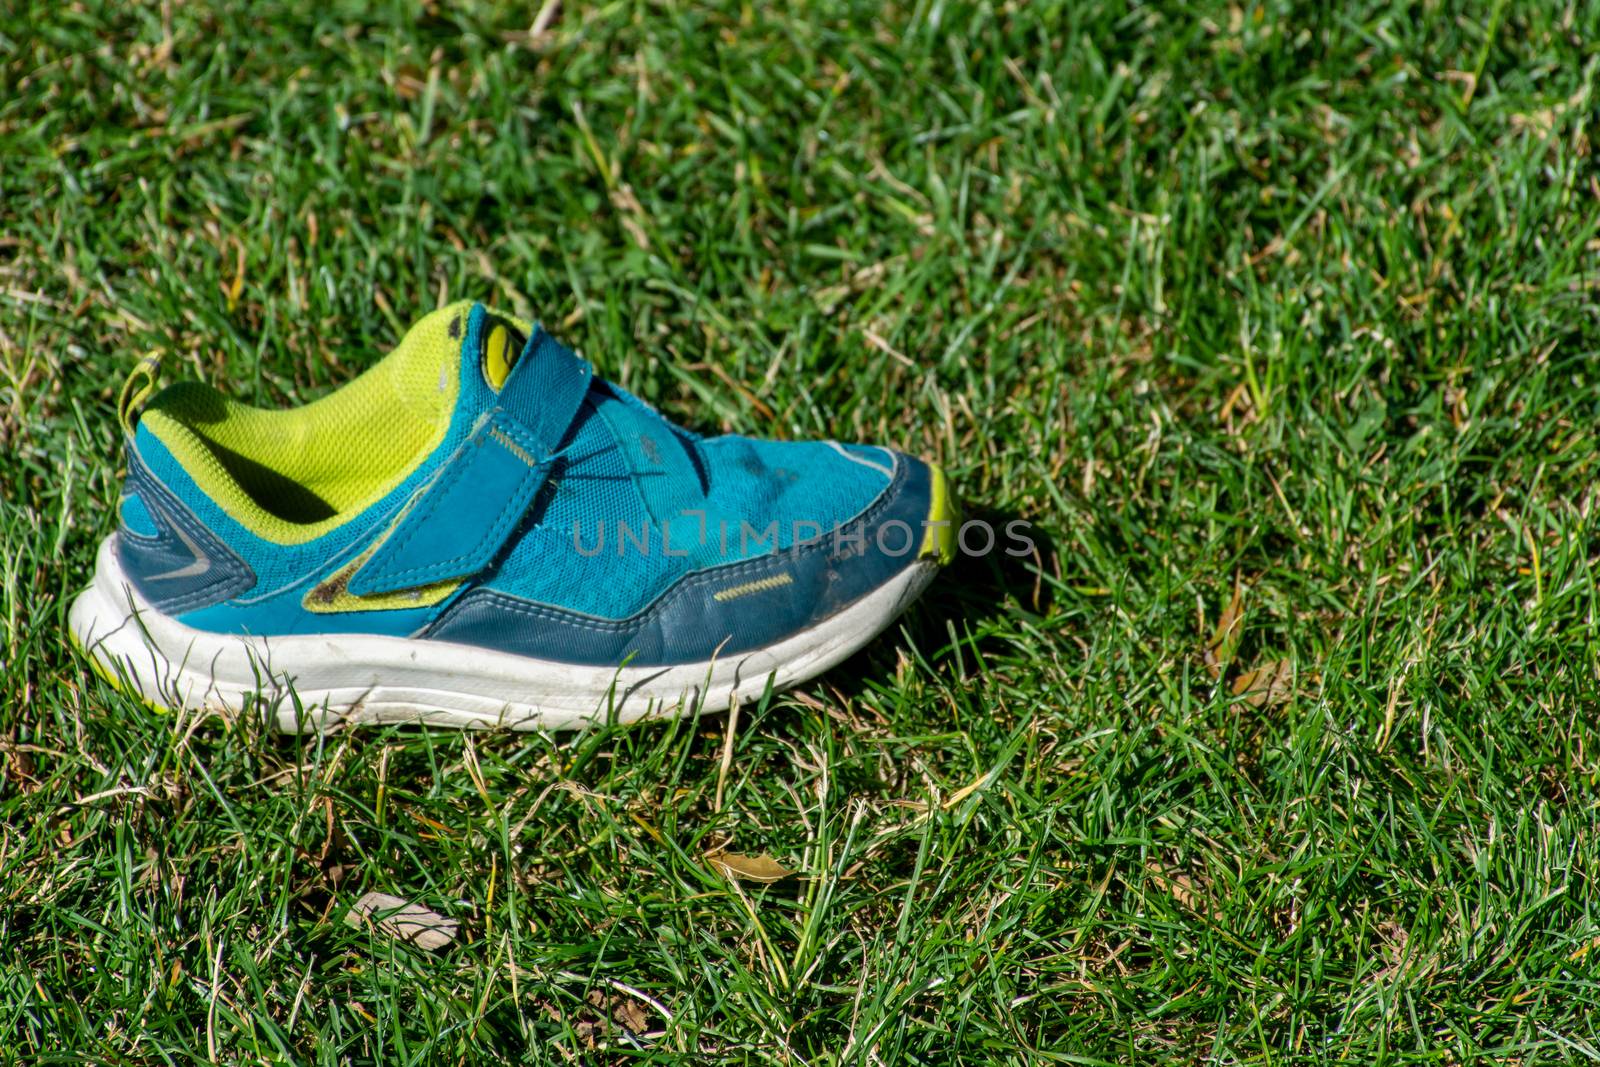 Child's blue and green shoe sits in the sunshine on the green gr by kingmaphotos